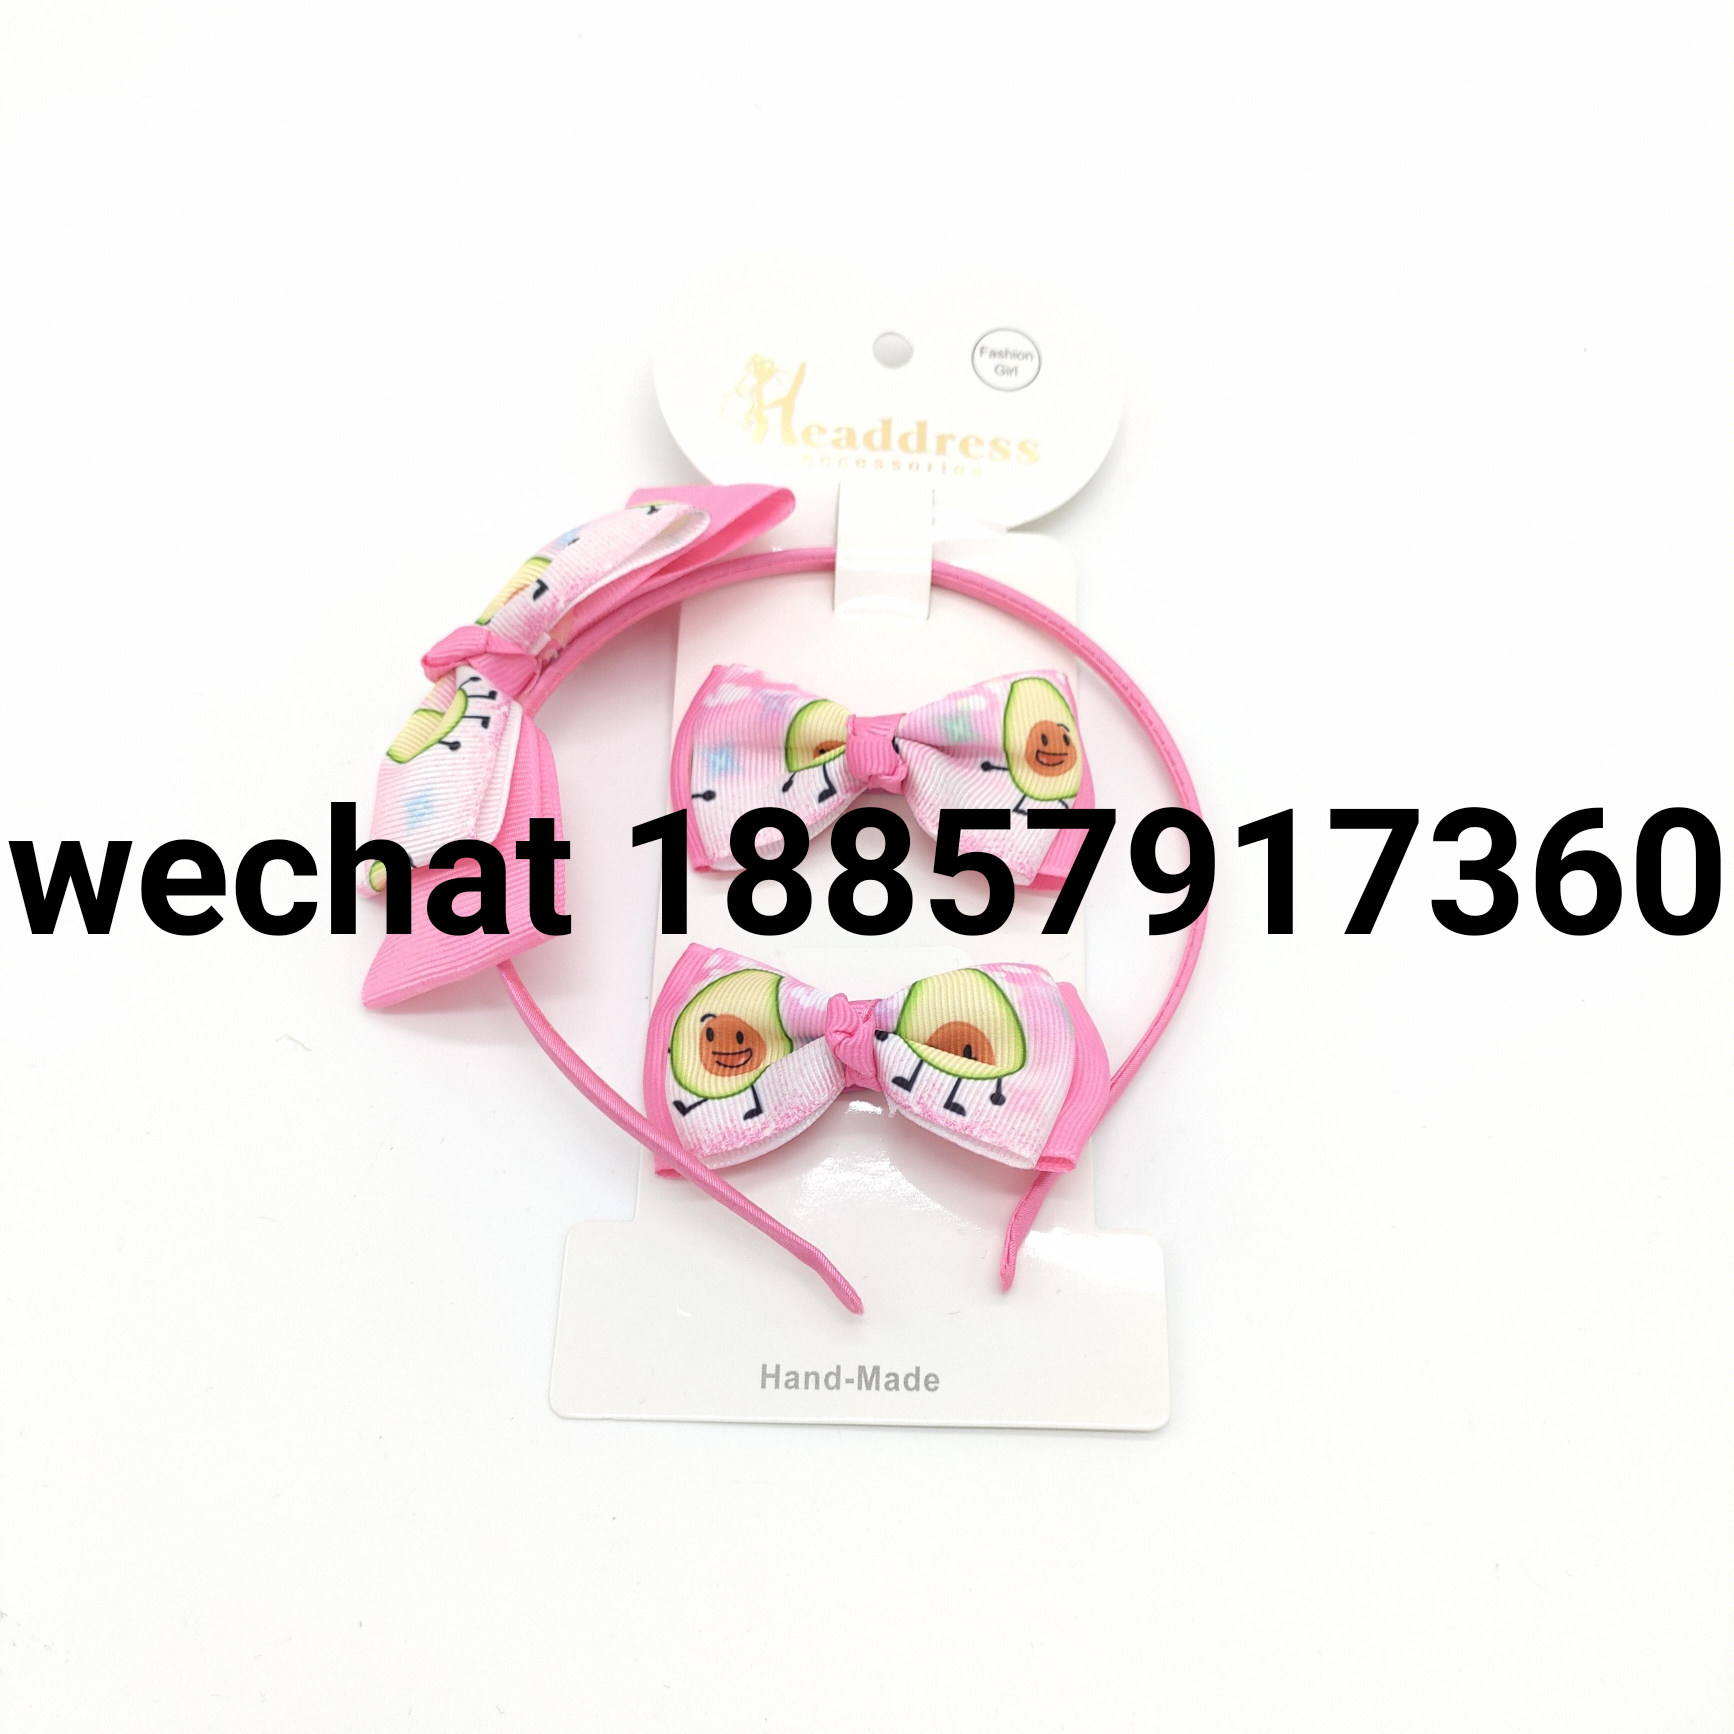 Childrens Hair Accessories Set Amazon hot style Girl furit priting Princess Wigs Hair Pin